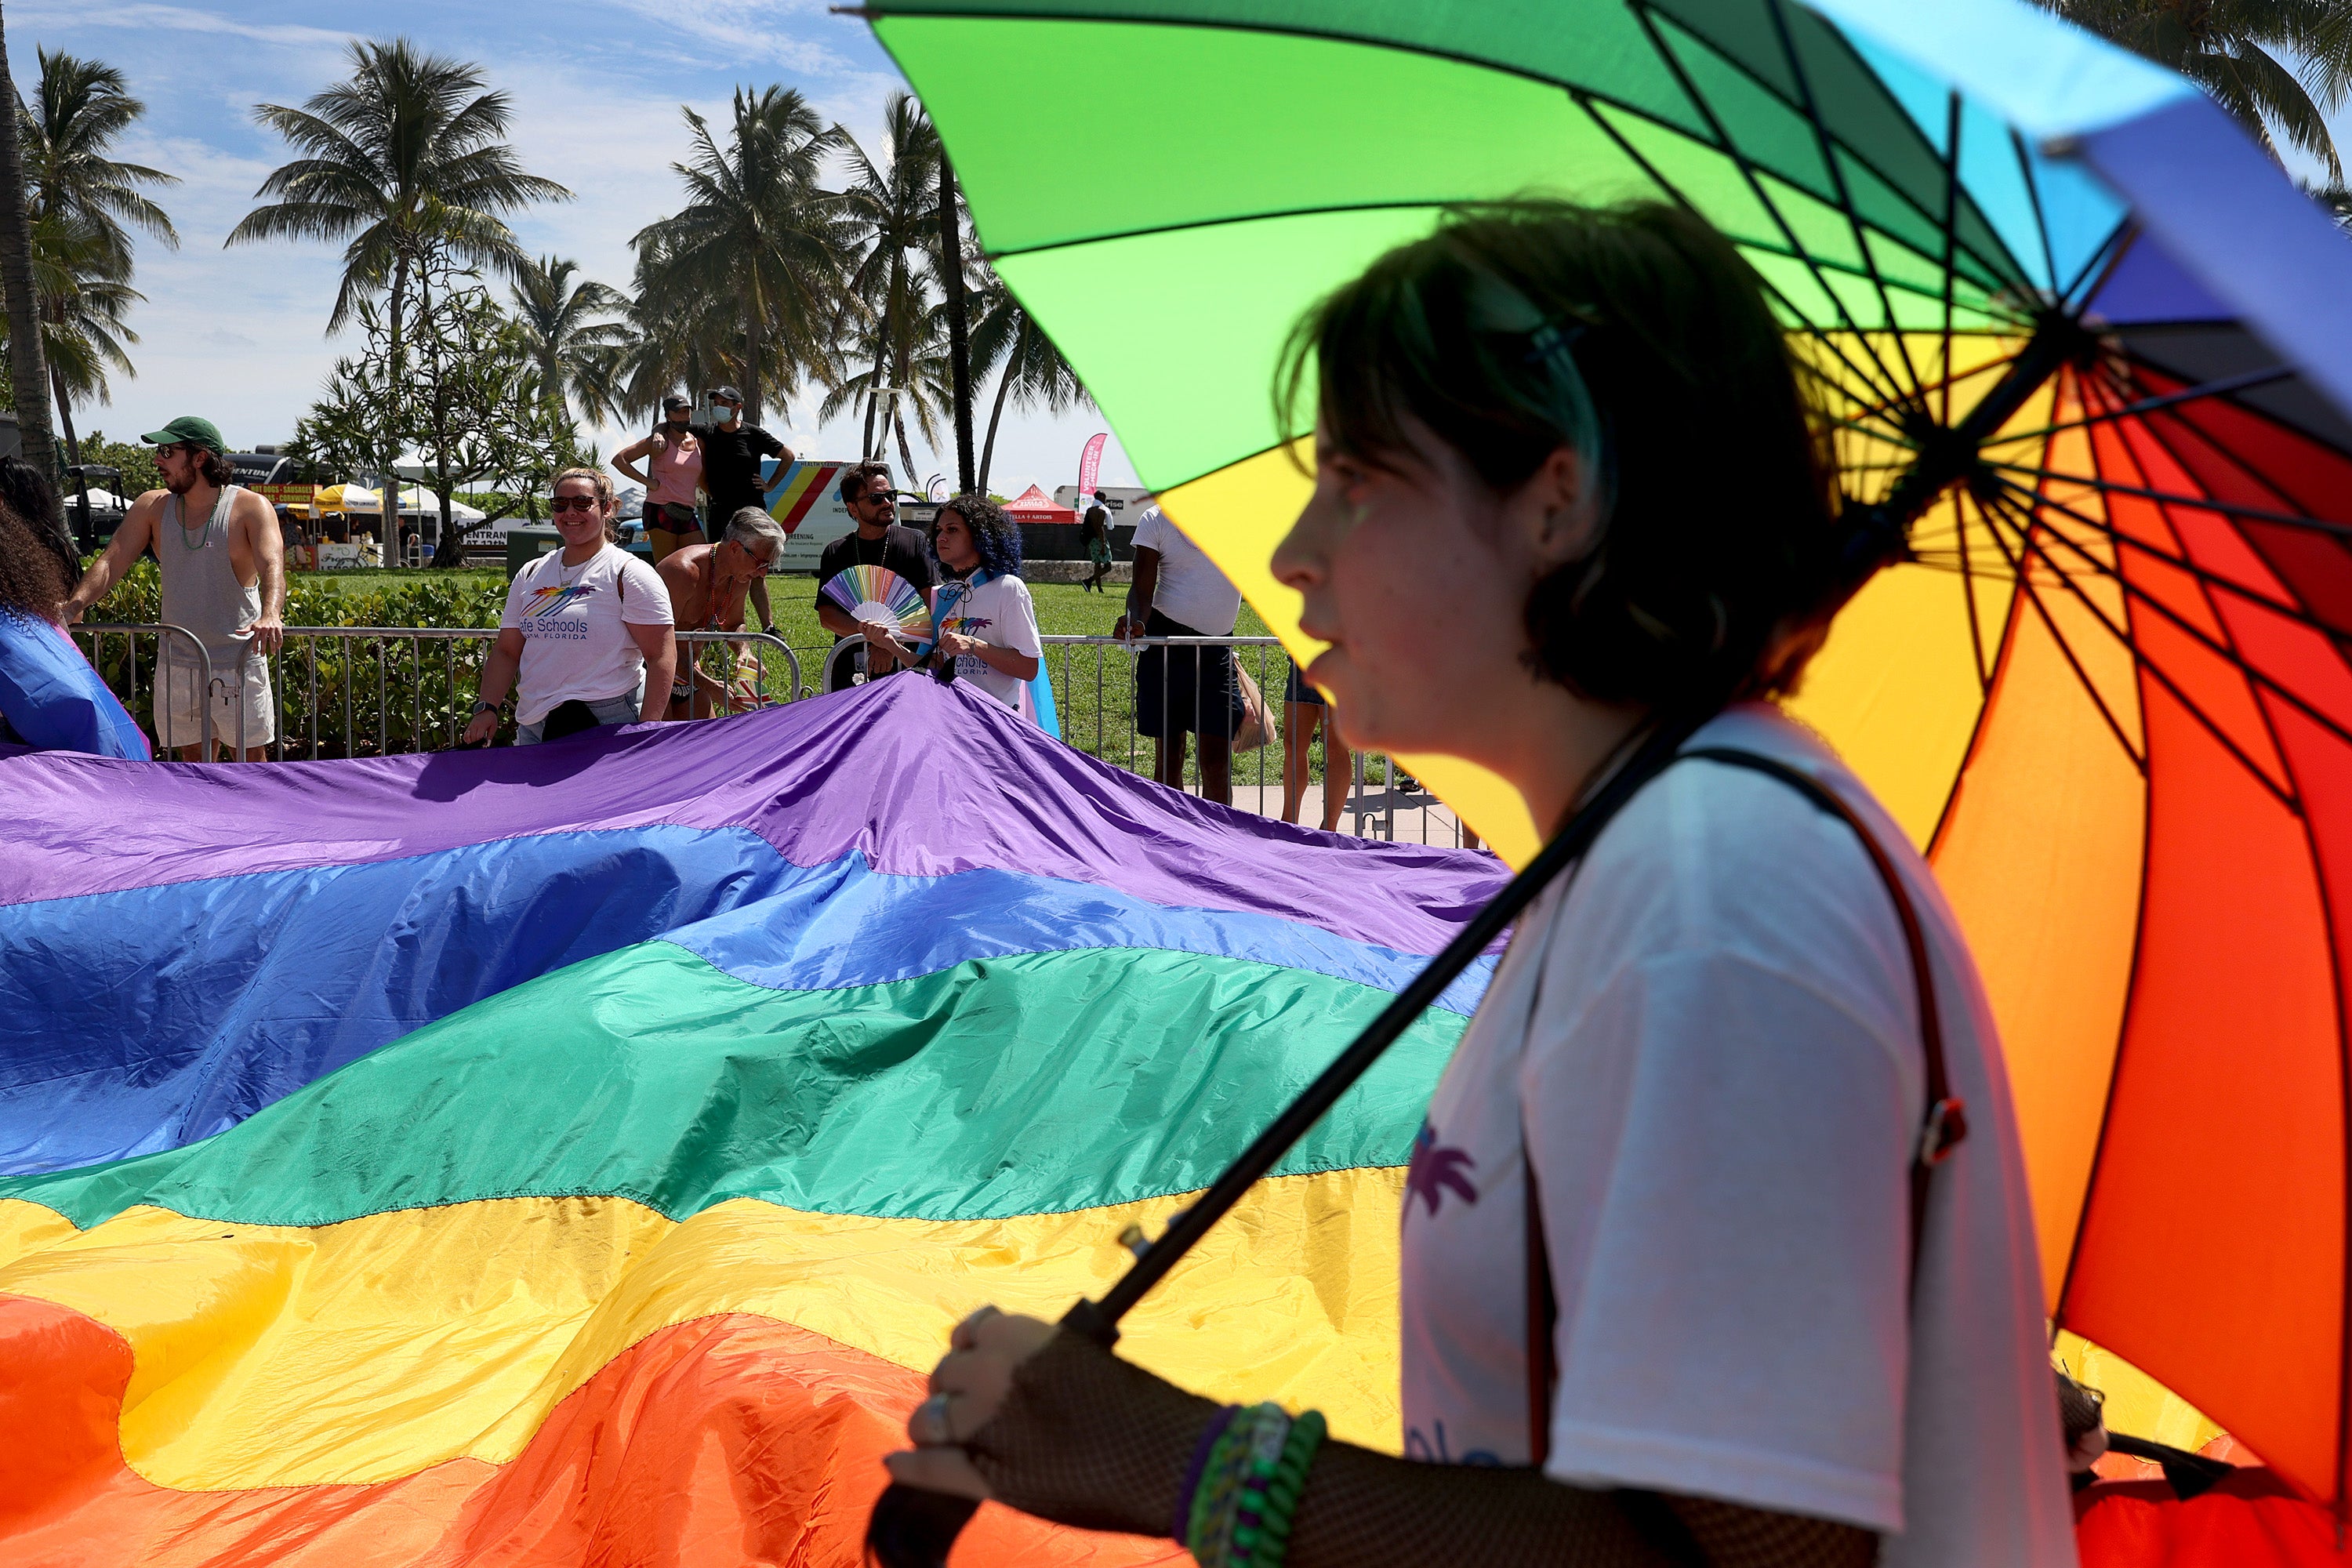 People carry the rainbow flag as they participate in the Miami Beach Pride Parade along Ocean Drive on 19 September 2021 in Miami Beach, Florida